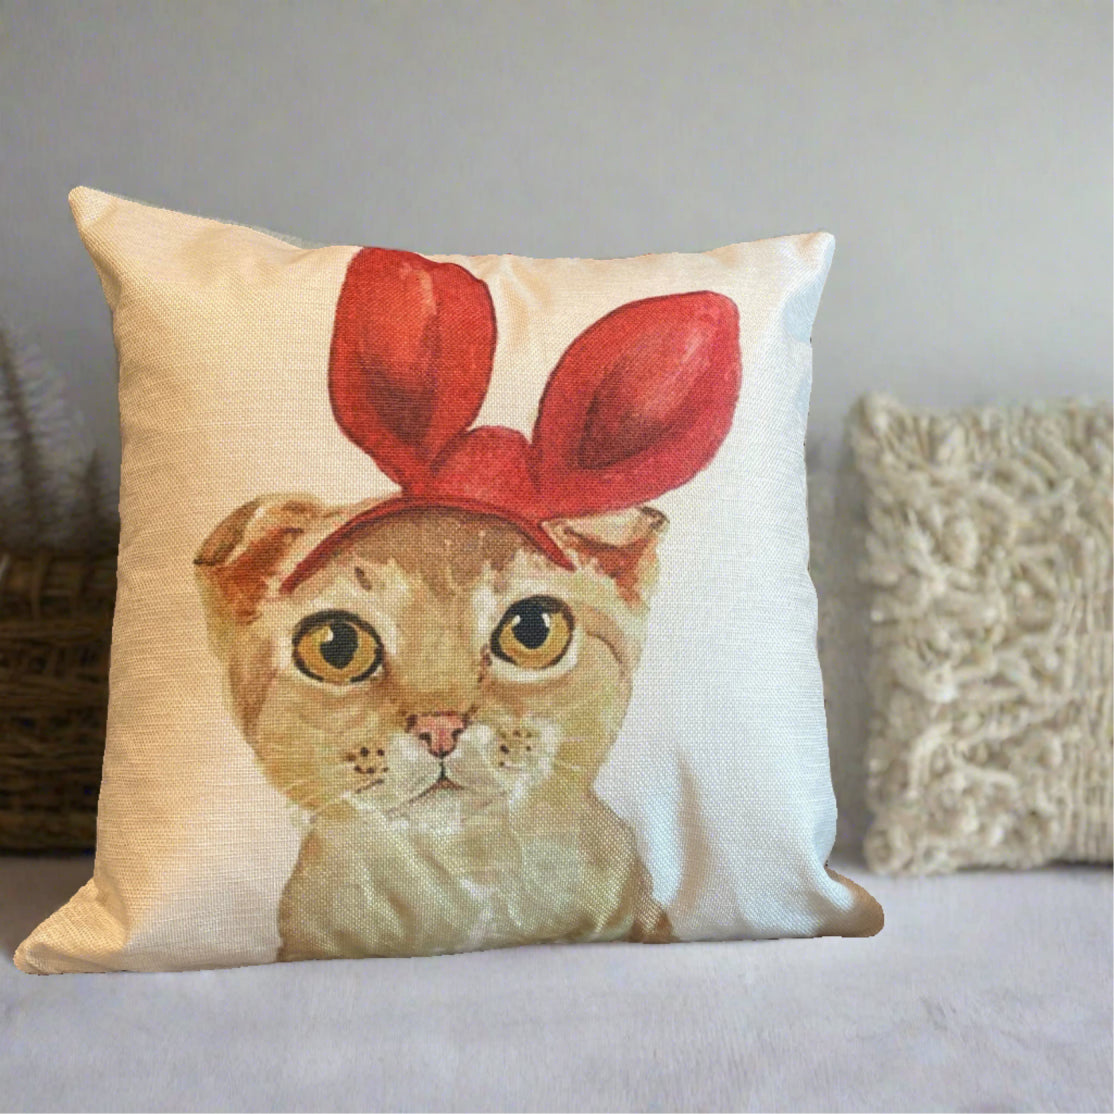 Lovely Orange Tabby Cat With Red Bunny Ear Pillow Cover